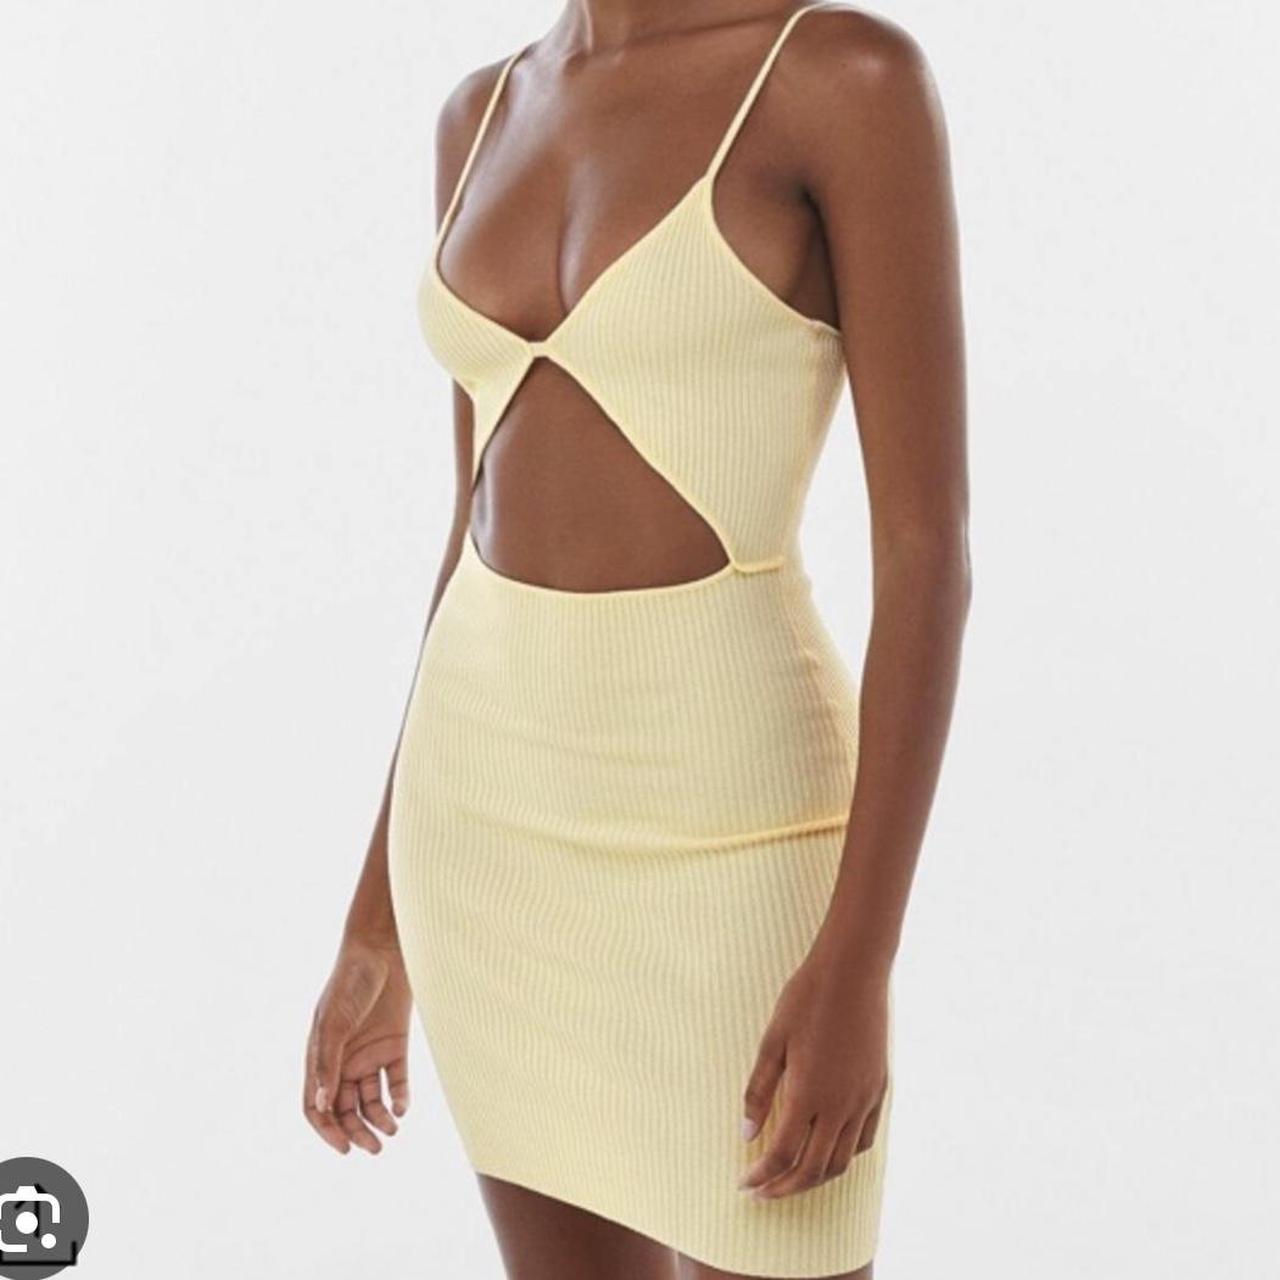 Selling This Fab Yellow Cut Out Mini Dress From Depop